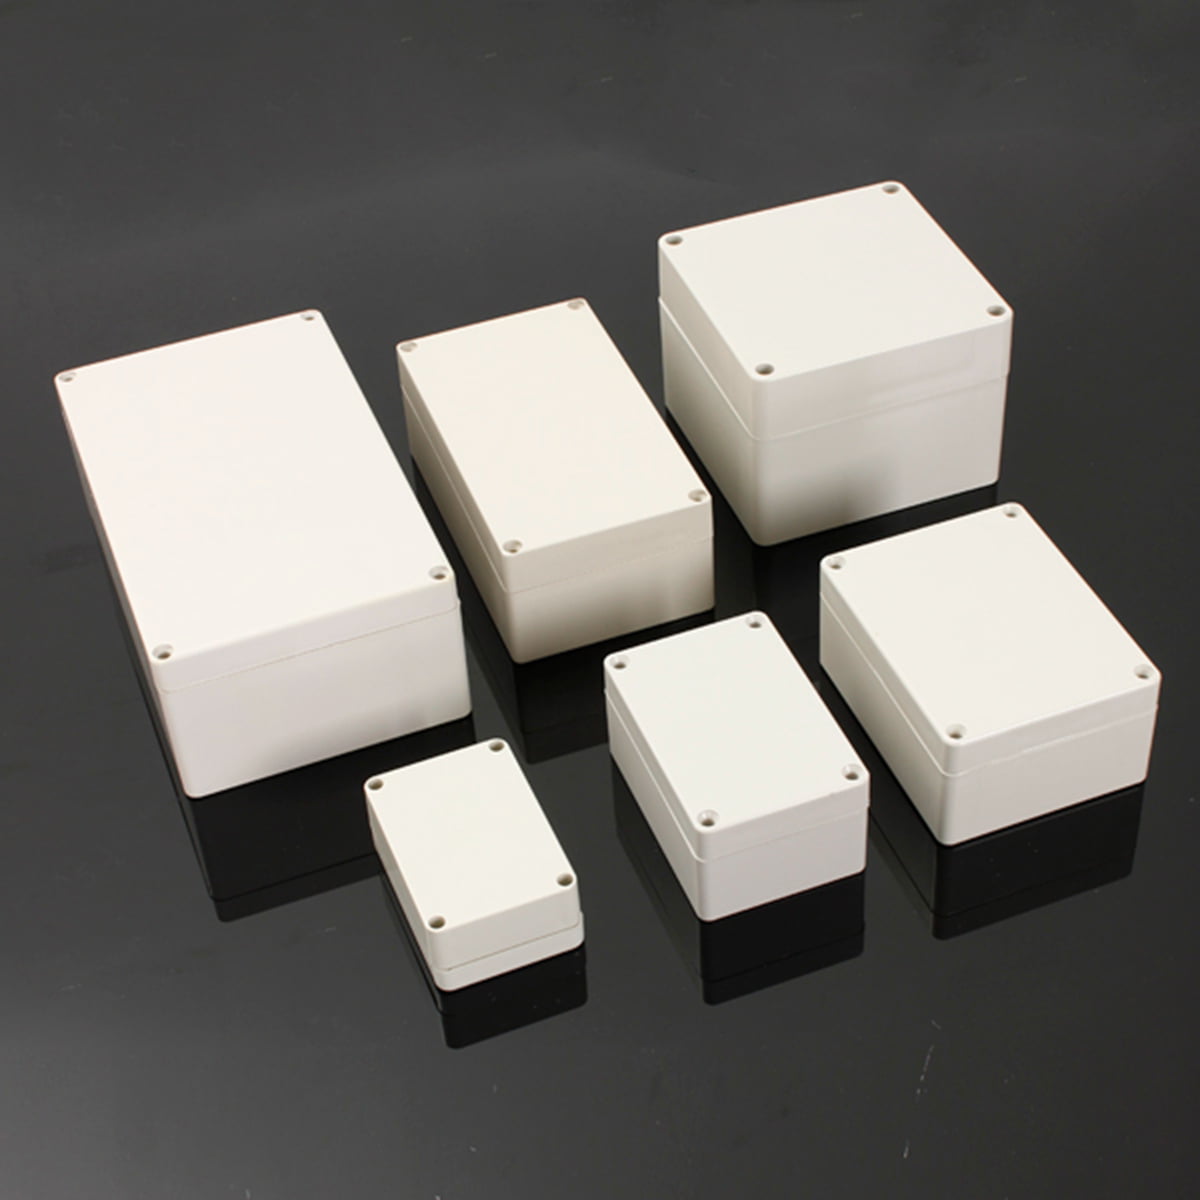 115x90x55mm Waterproof Electronic Project Box Enclosure Case Screw Junction Box 